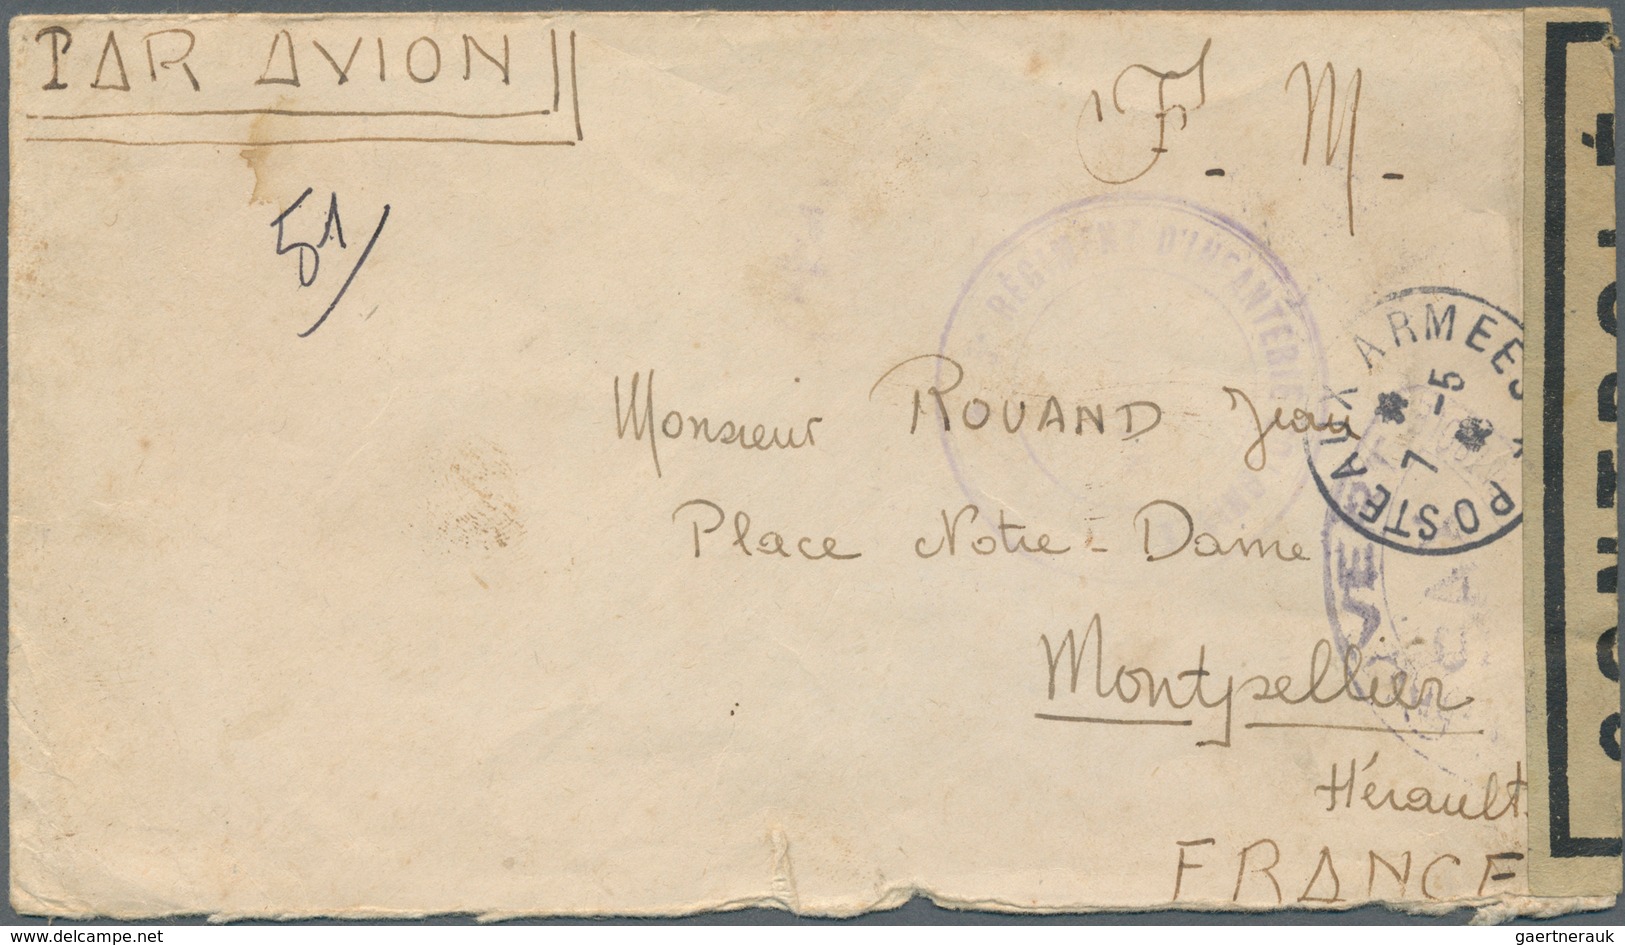 08487 Französisch-Indochina: 1946. Stampless Air Mail Envelope Written From Pakse, Laos Dated '28th Avril - Briefe U. Dokumente